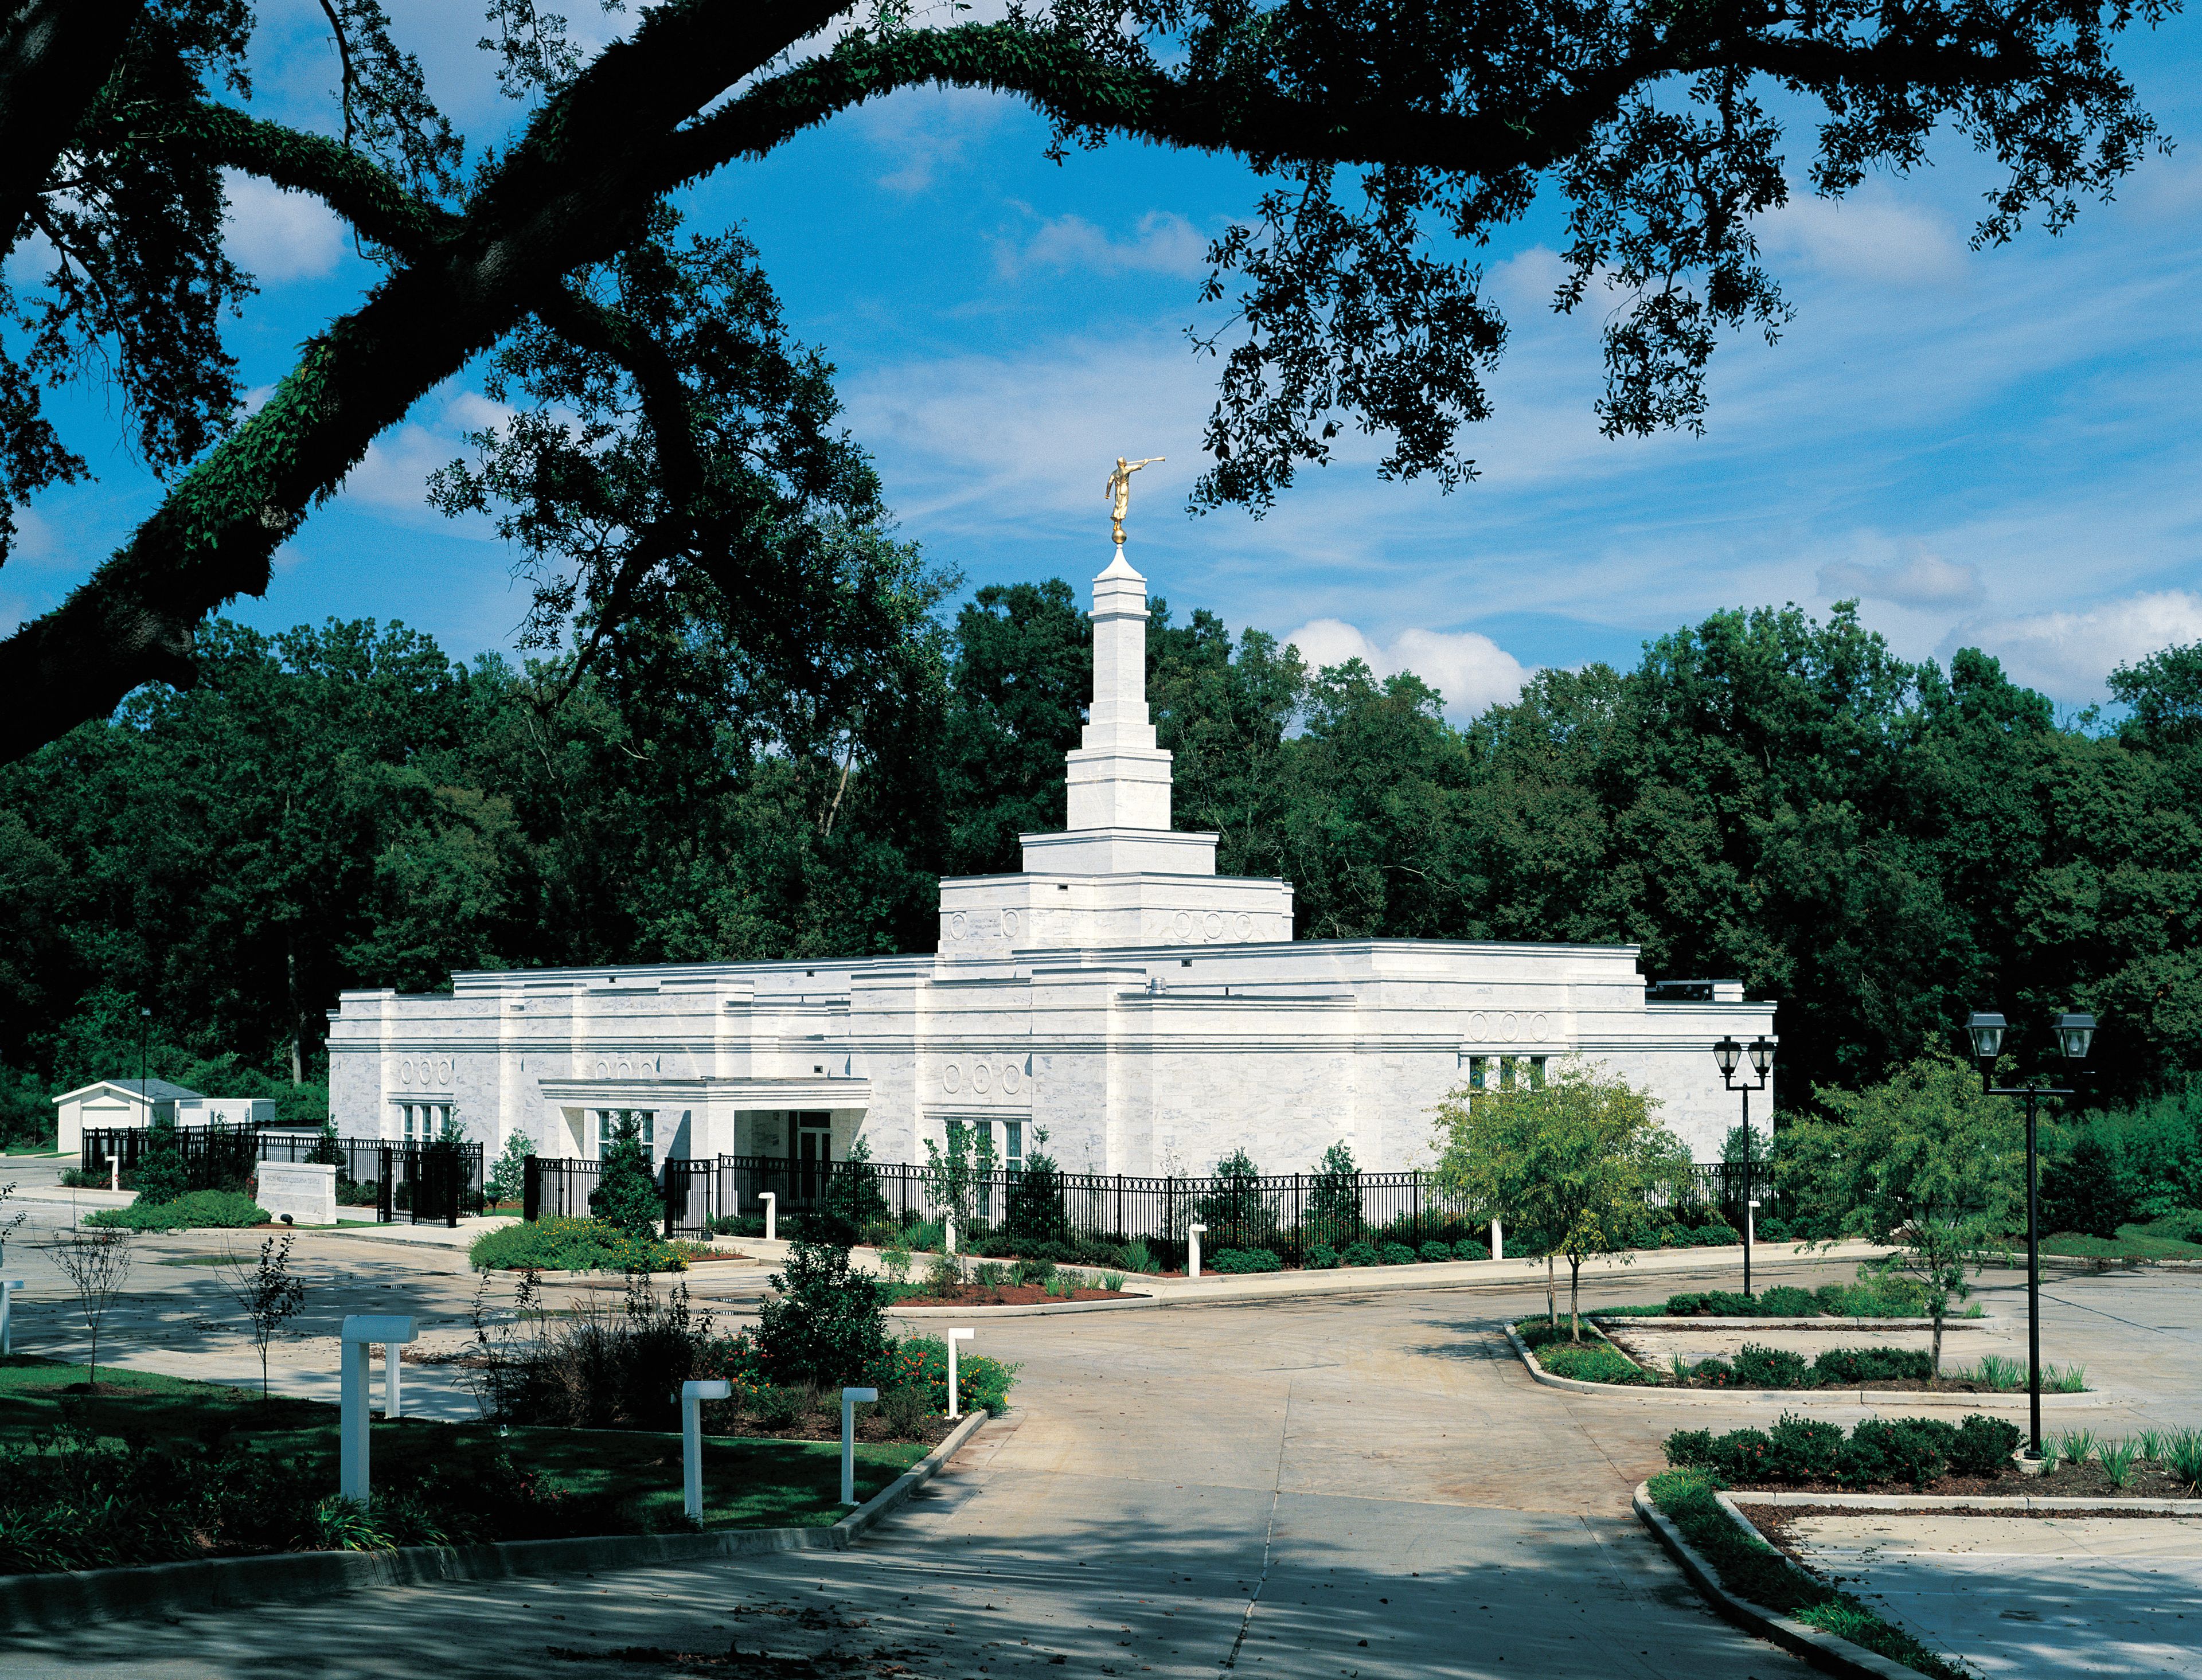 A side view of the Baton Rouge Louisiana Temple on a sunny day.